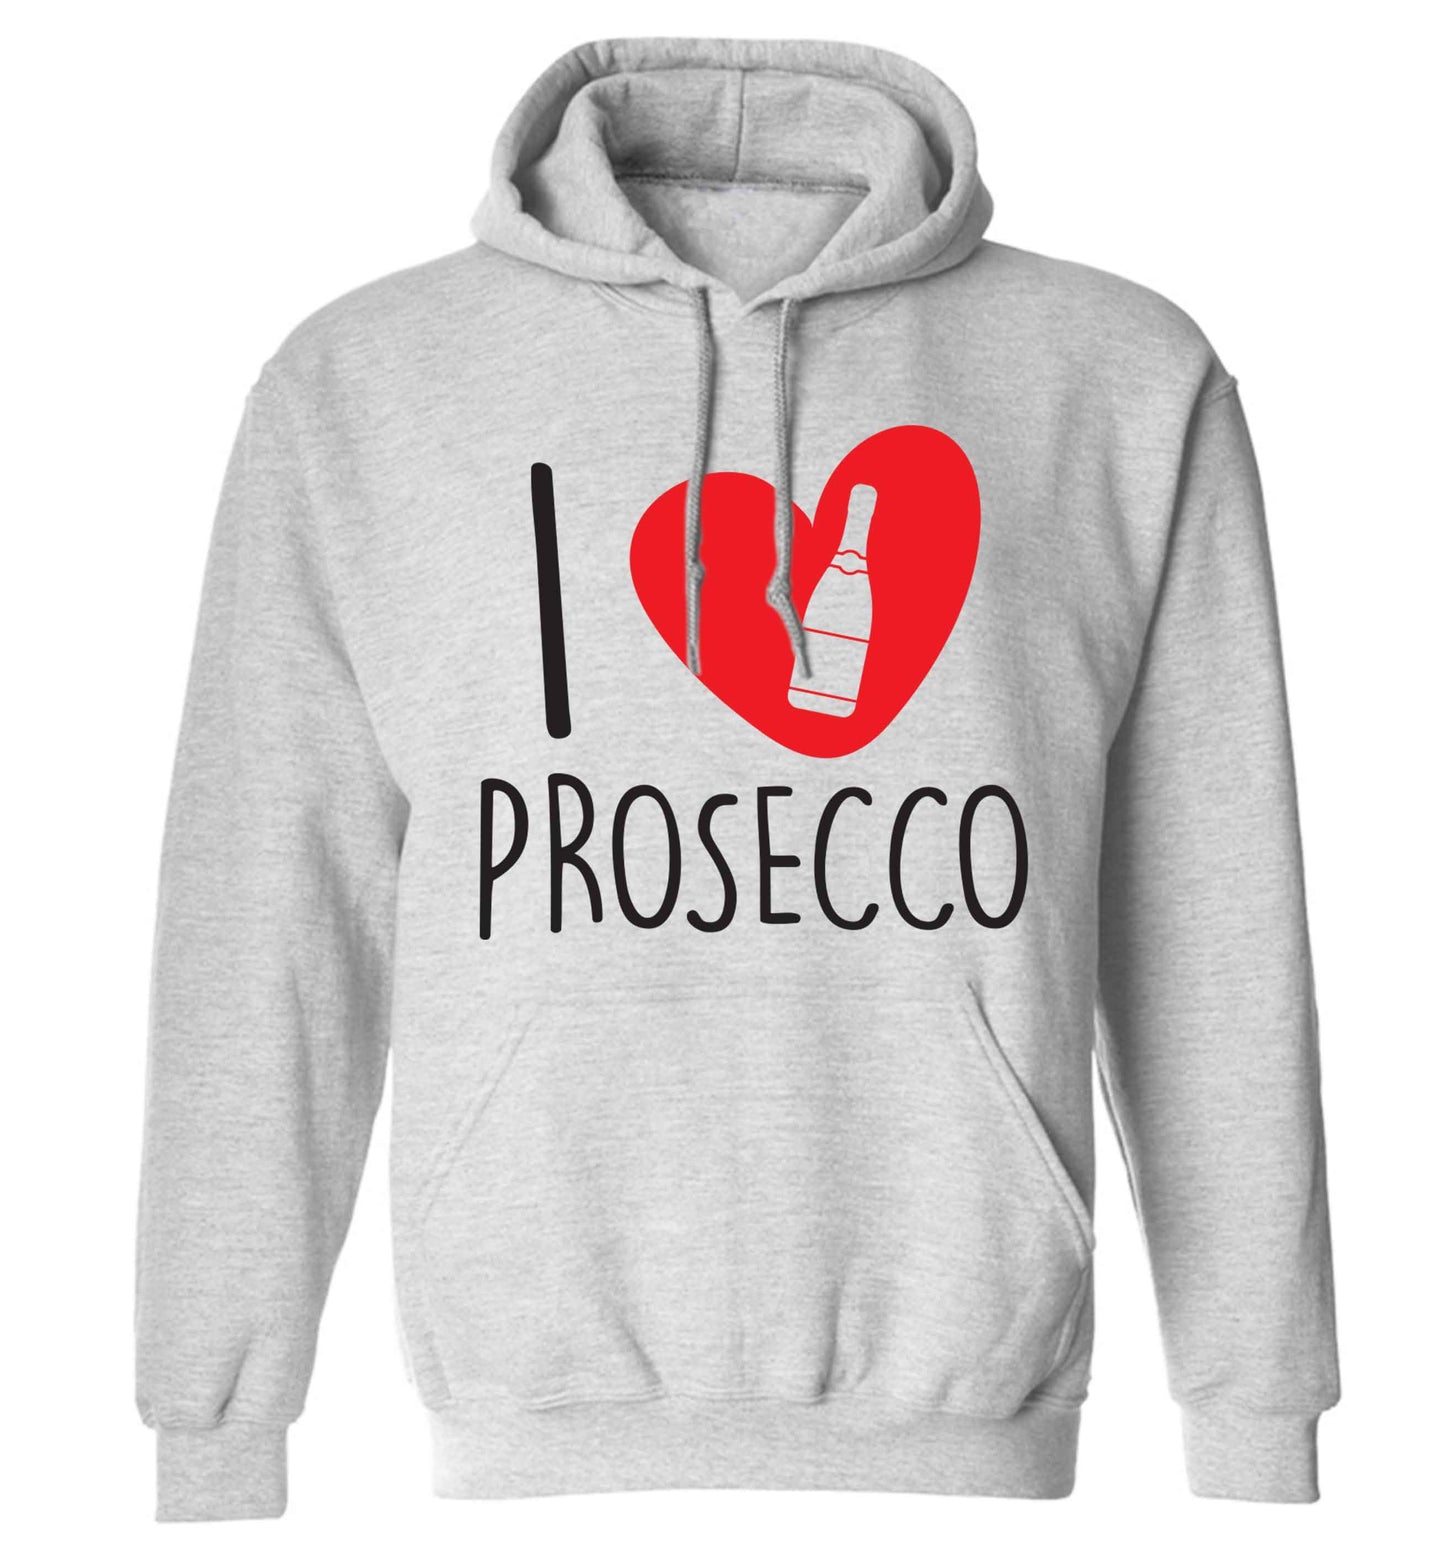 I love prosecco adults unisex grey hoodie 2XL